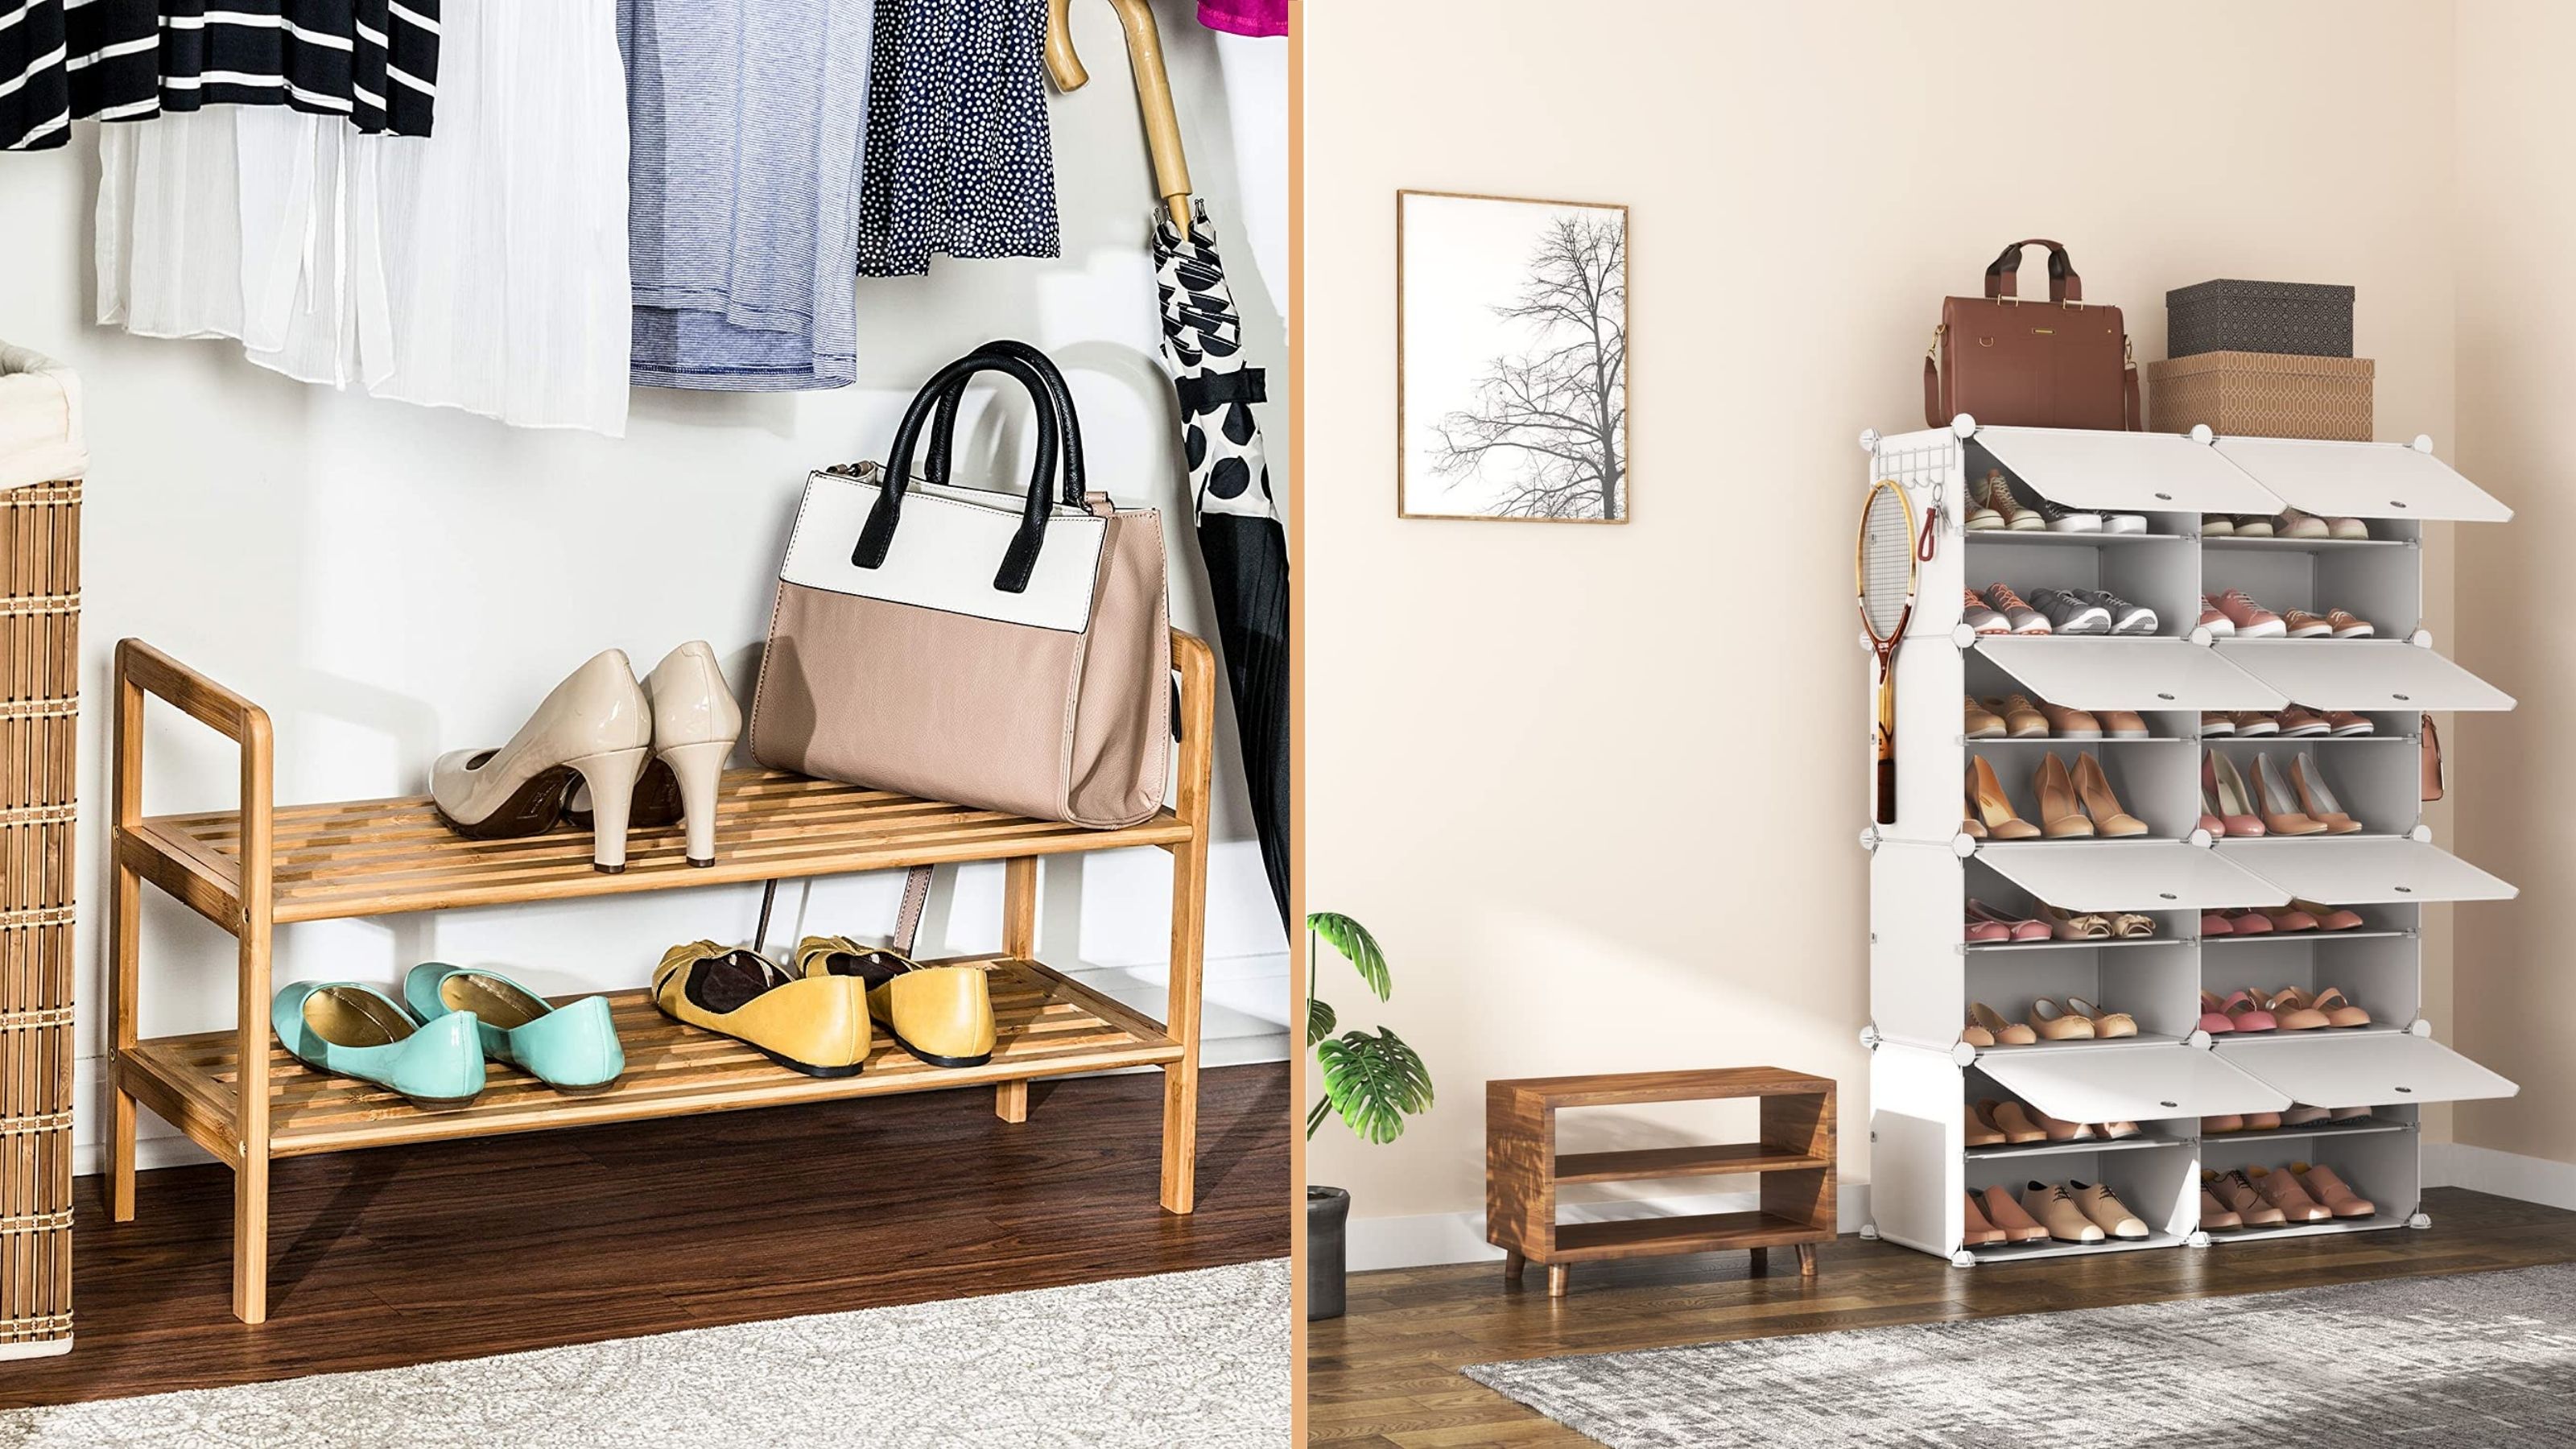 9 of most shoe racks keep your collection organized | Homes